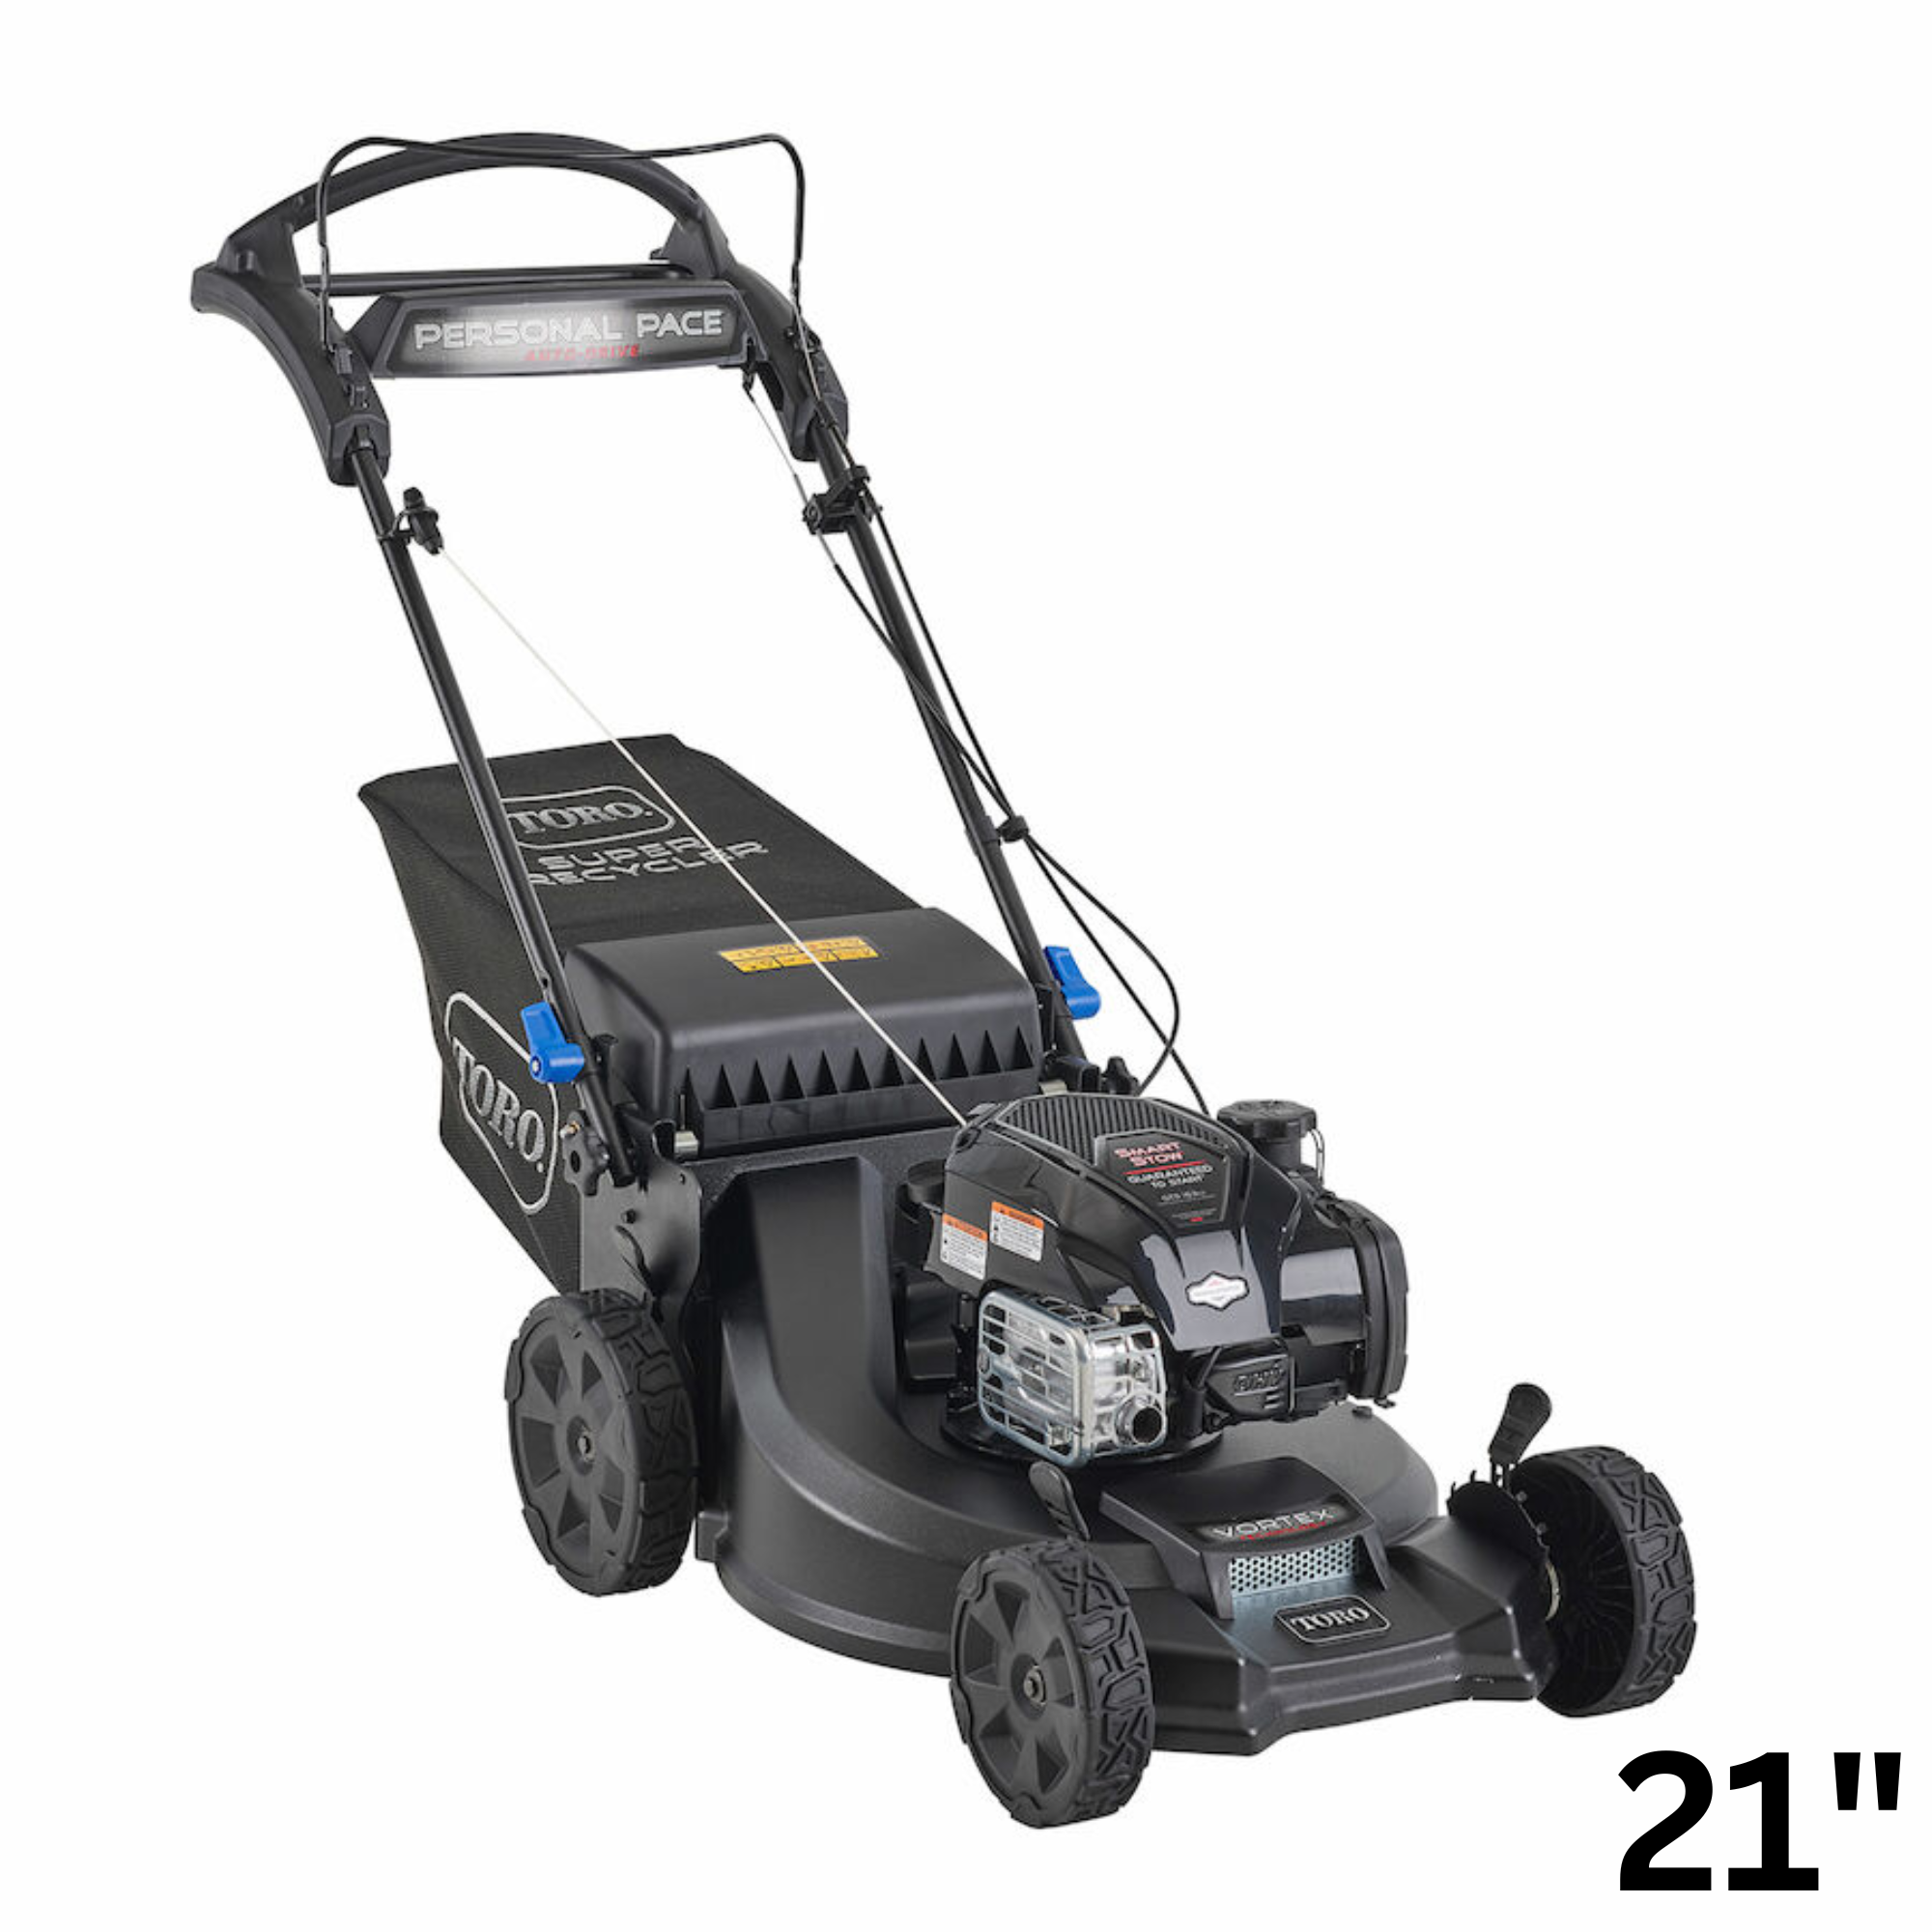 Toro 21 in. Super Recycler w/Spin-Stop & Personal Pace Gas Lawn Mower